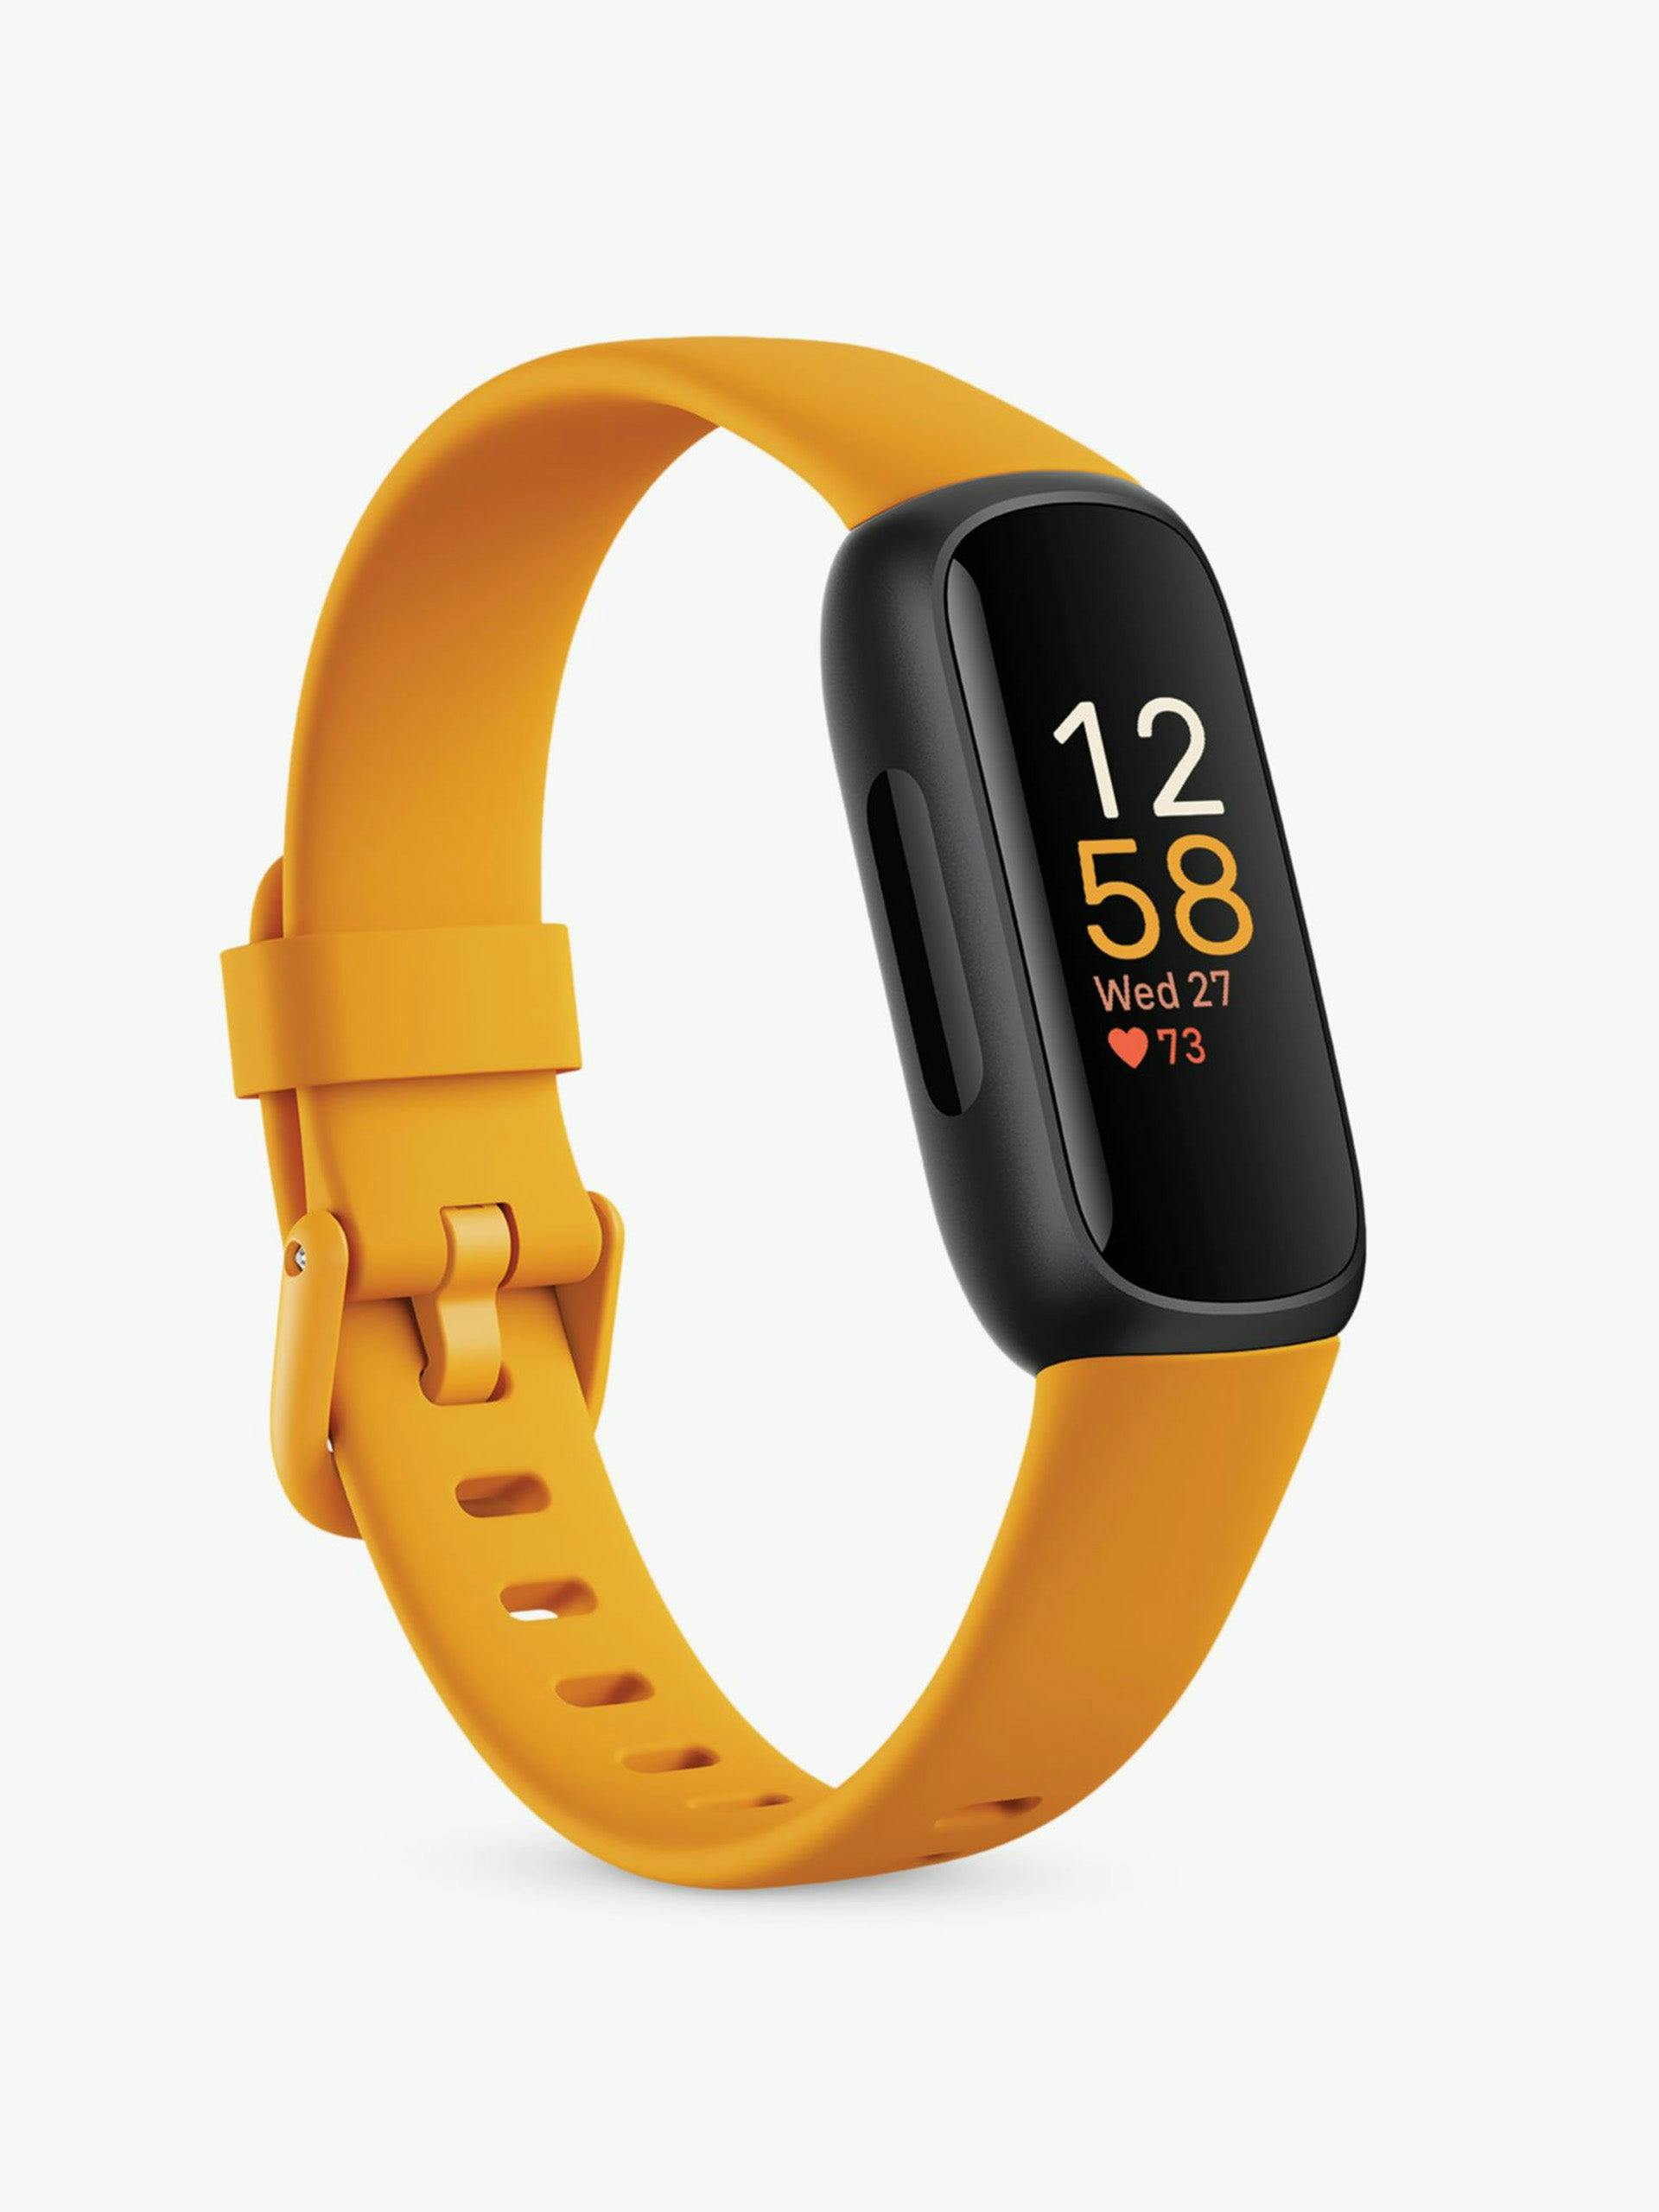 Health and fitness tracker with heart-rate monitor